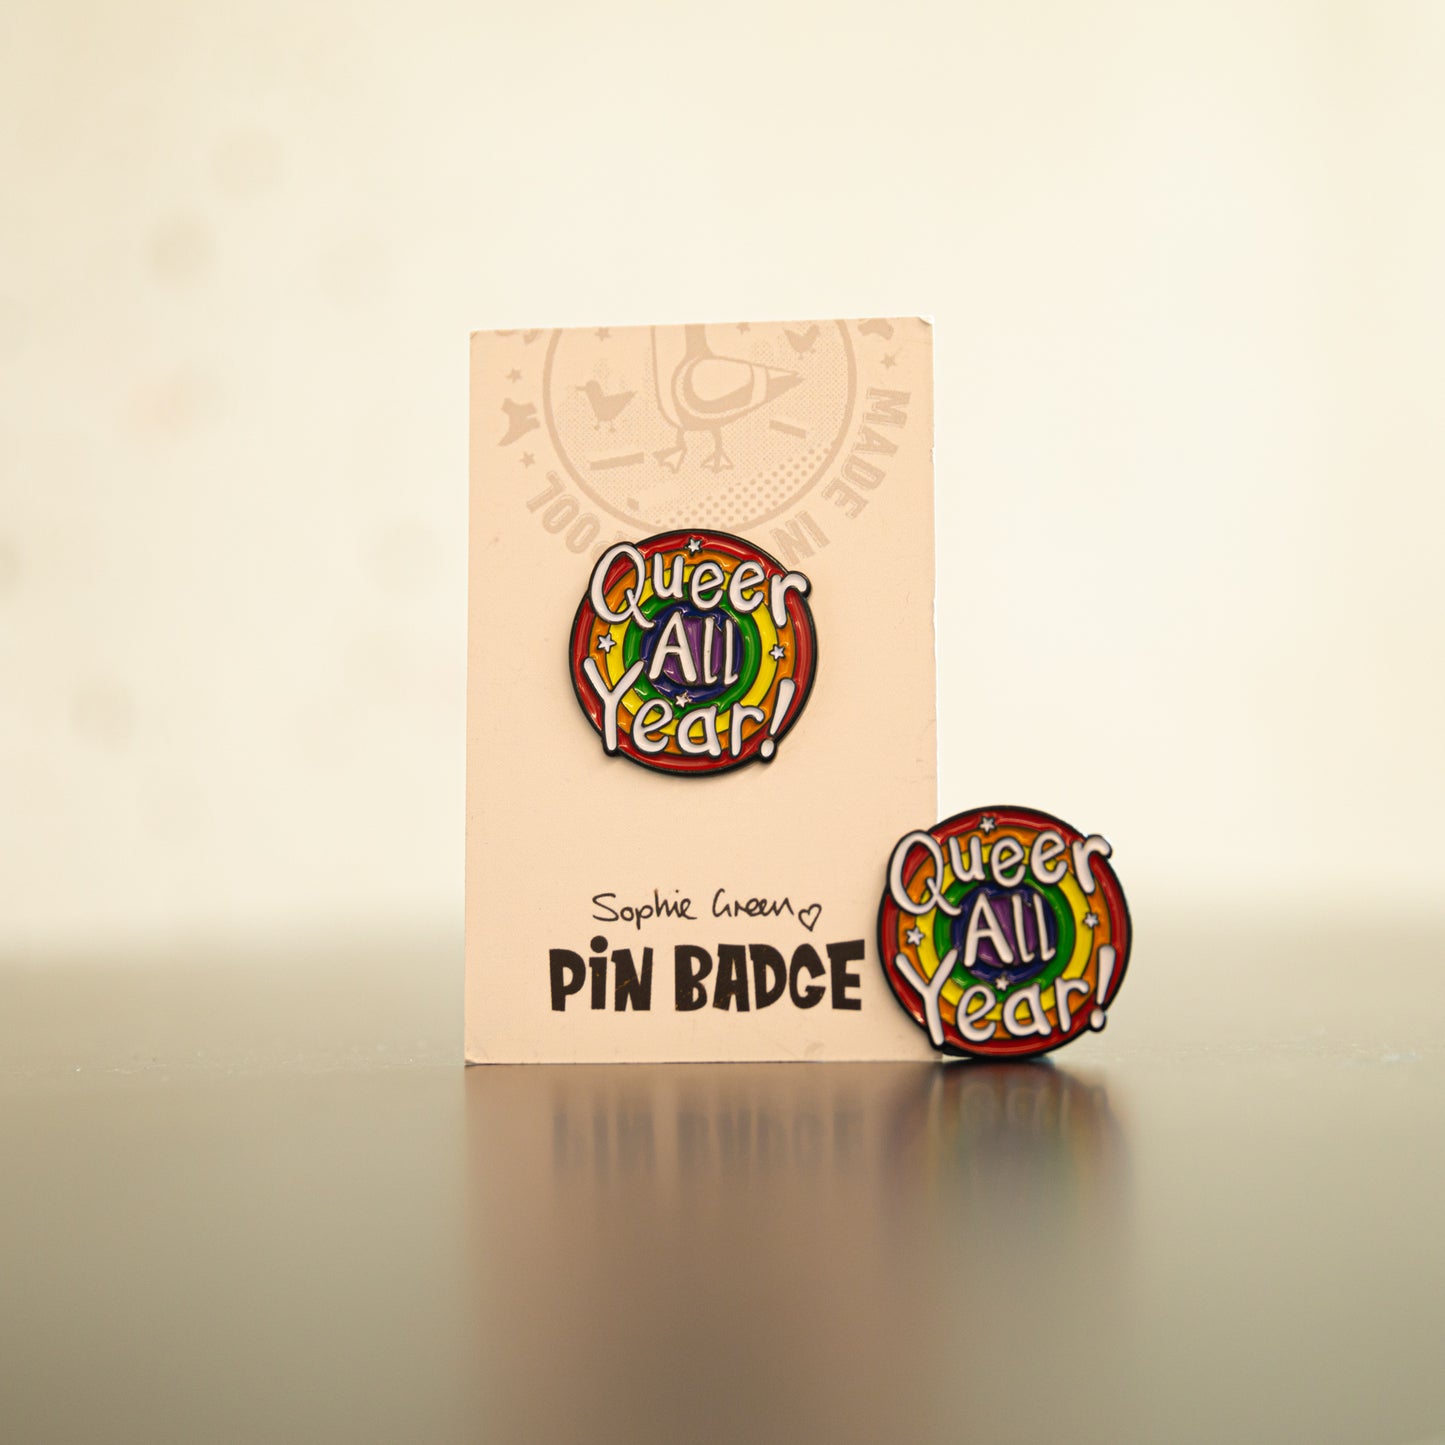 Queer All Year Pin Badge by Sophie Green